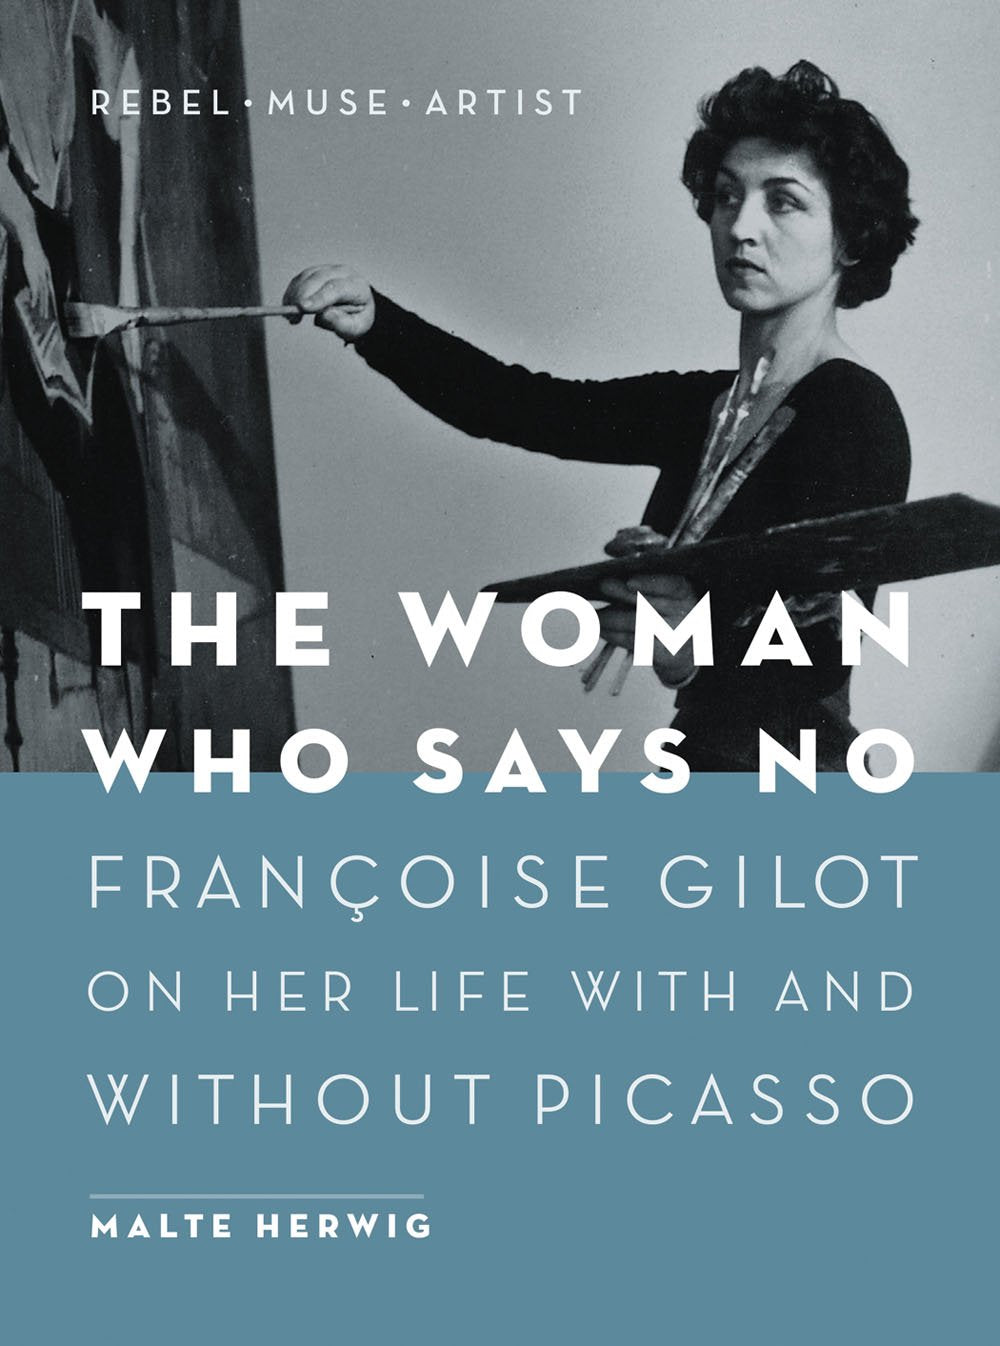 The Woman Who Says No: Françoise Gilot on Her Life With and Without Picasso - Rebel, Muse, Artist